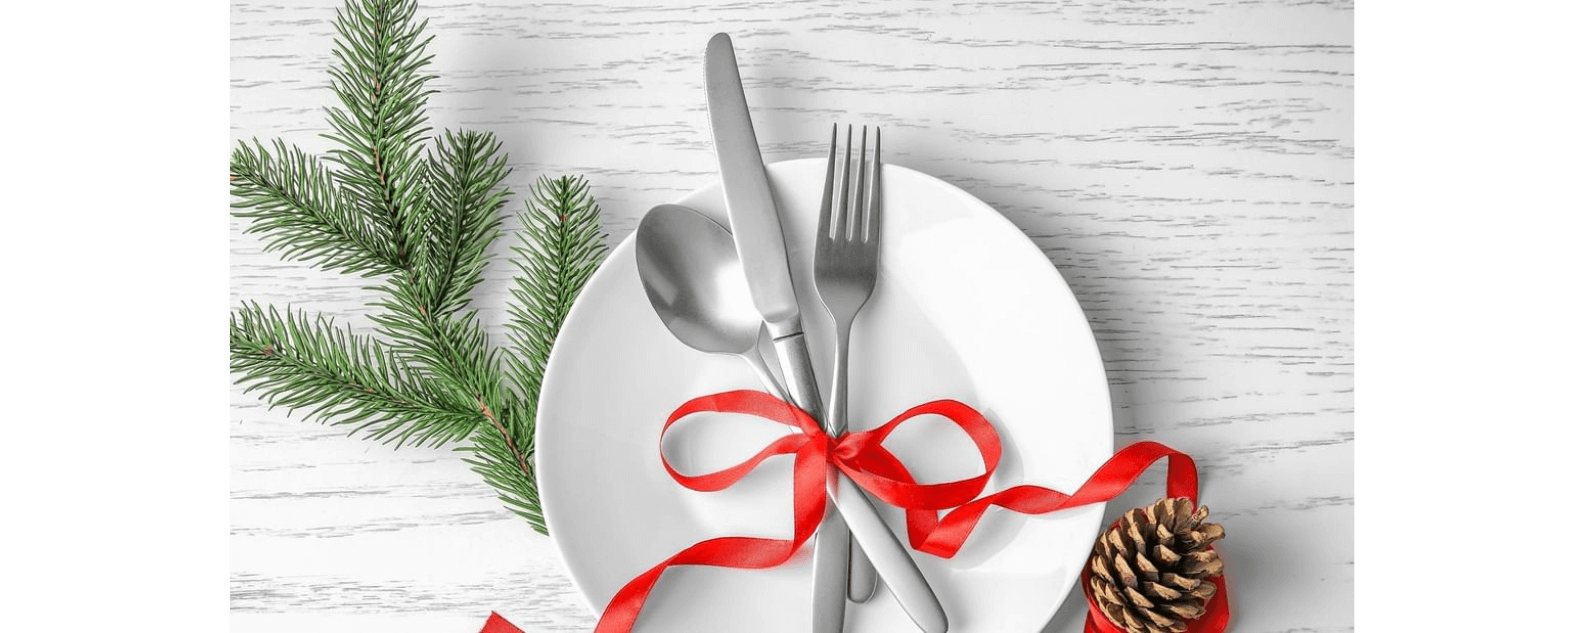 Utensils tied with ribbon on plate, next to conifer sprig